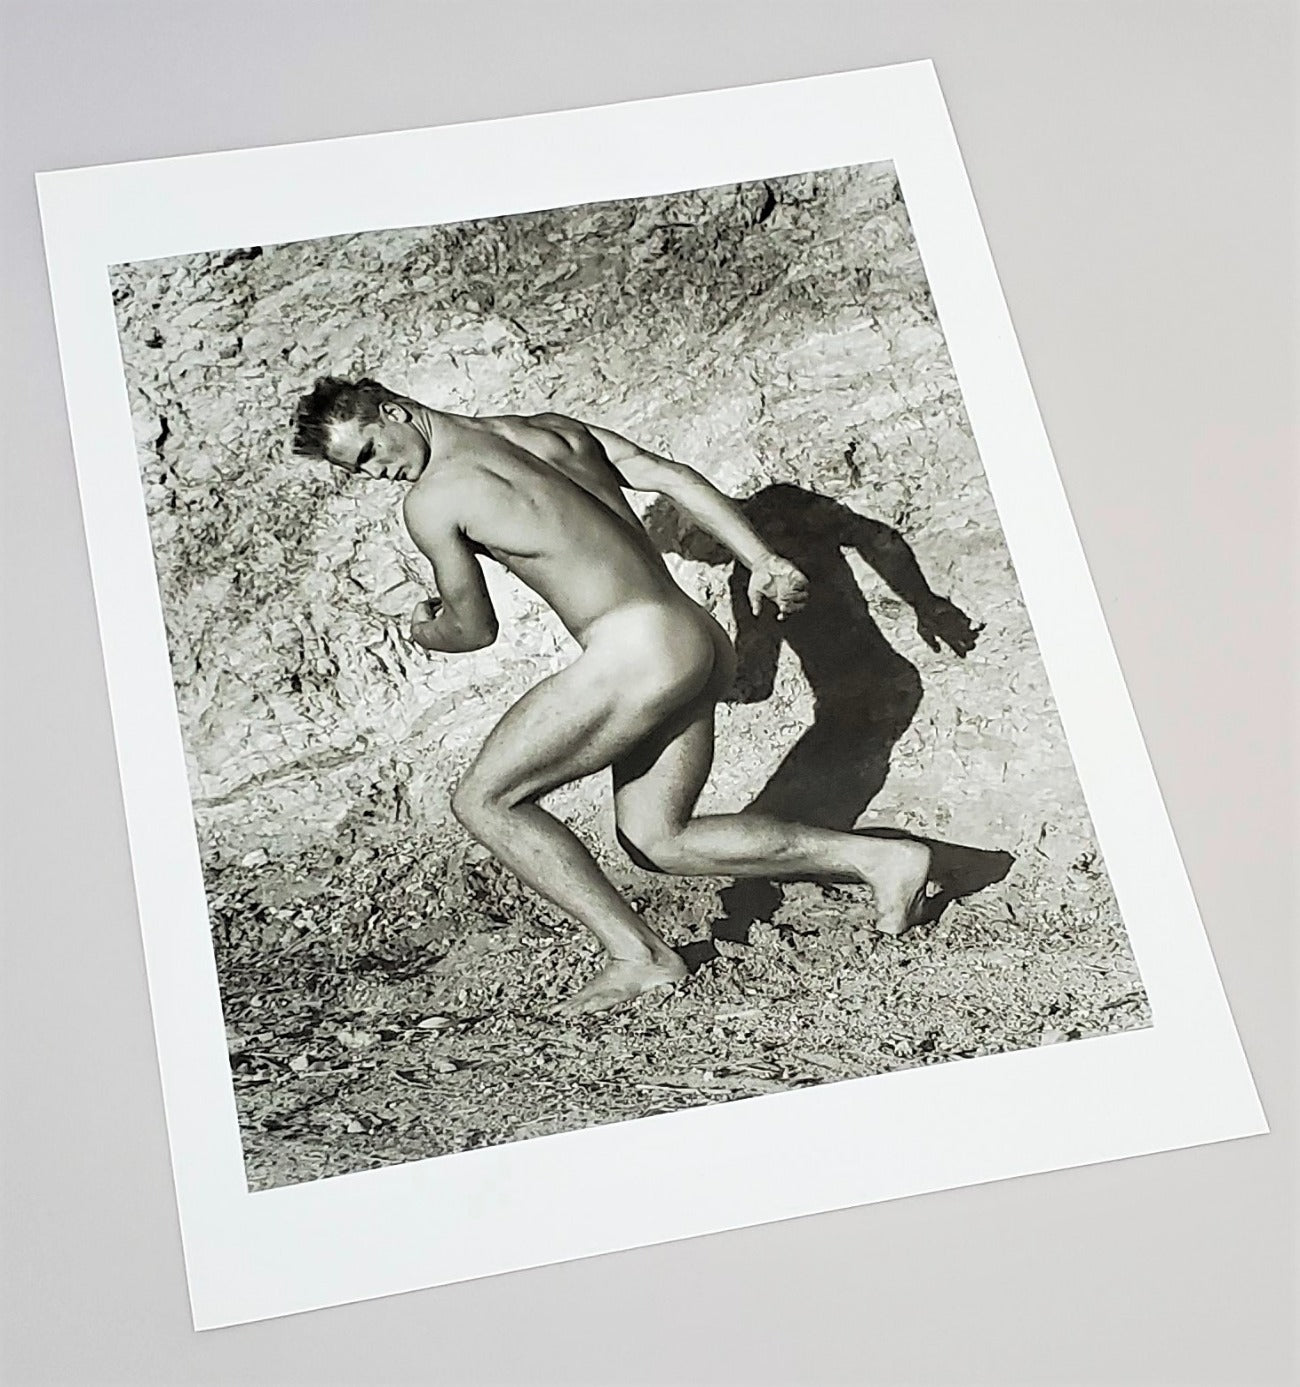 Original Herb Ritts photography page featured in 1991 Duo hardcover book